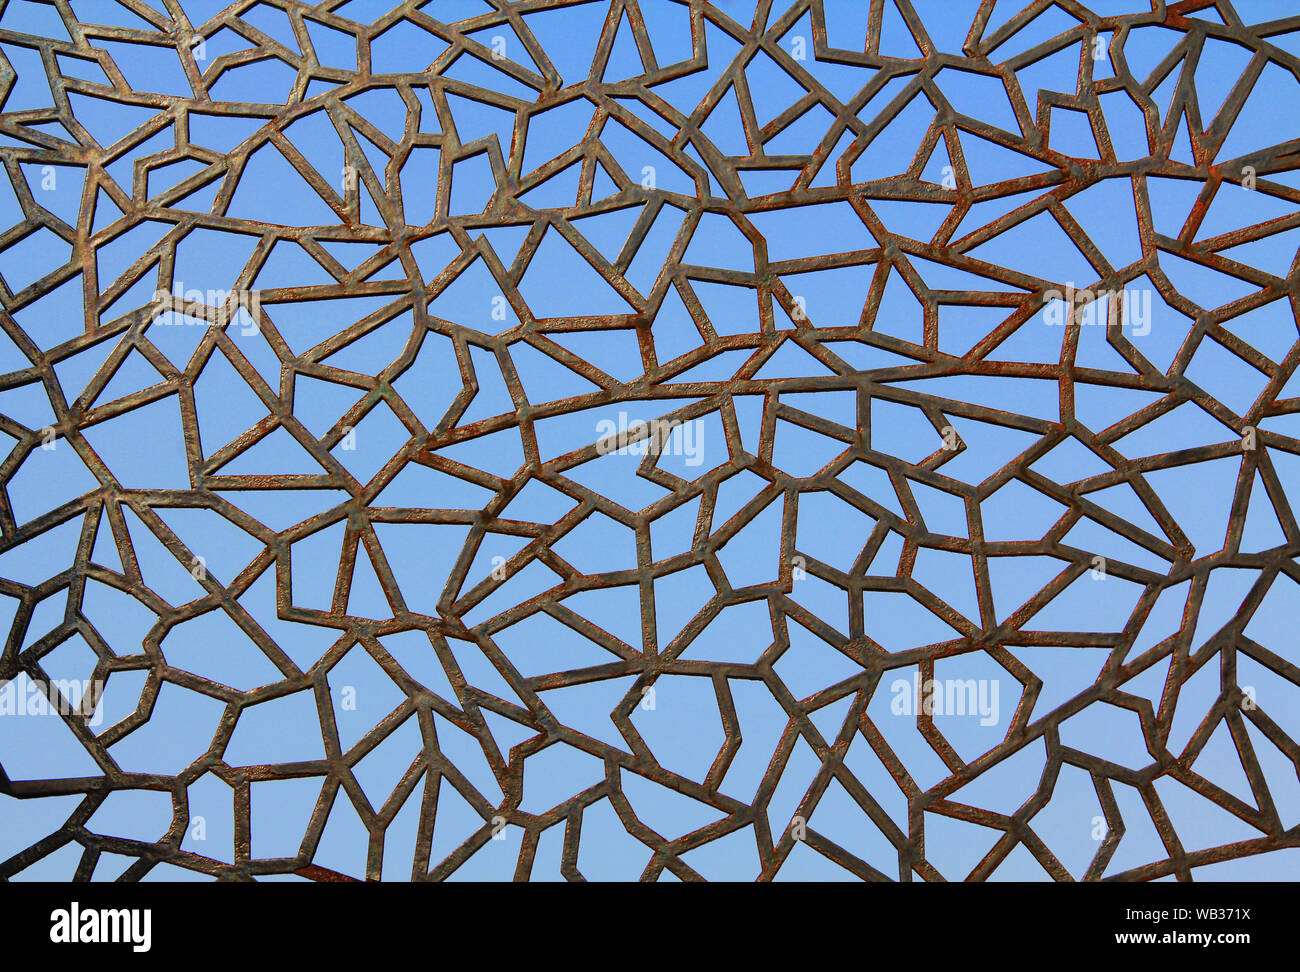 Close-up of Abstract Metal Fence Against a Blue Sky Stock Photo